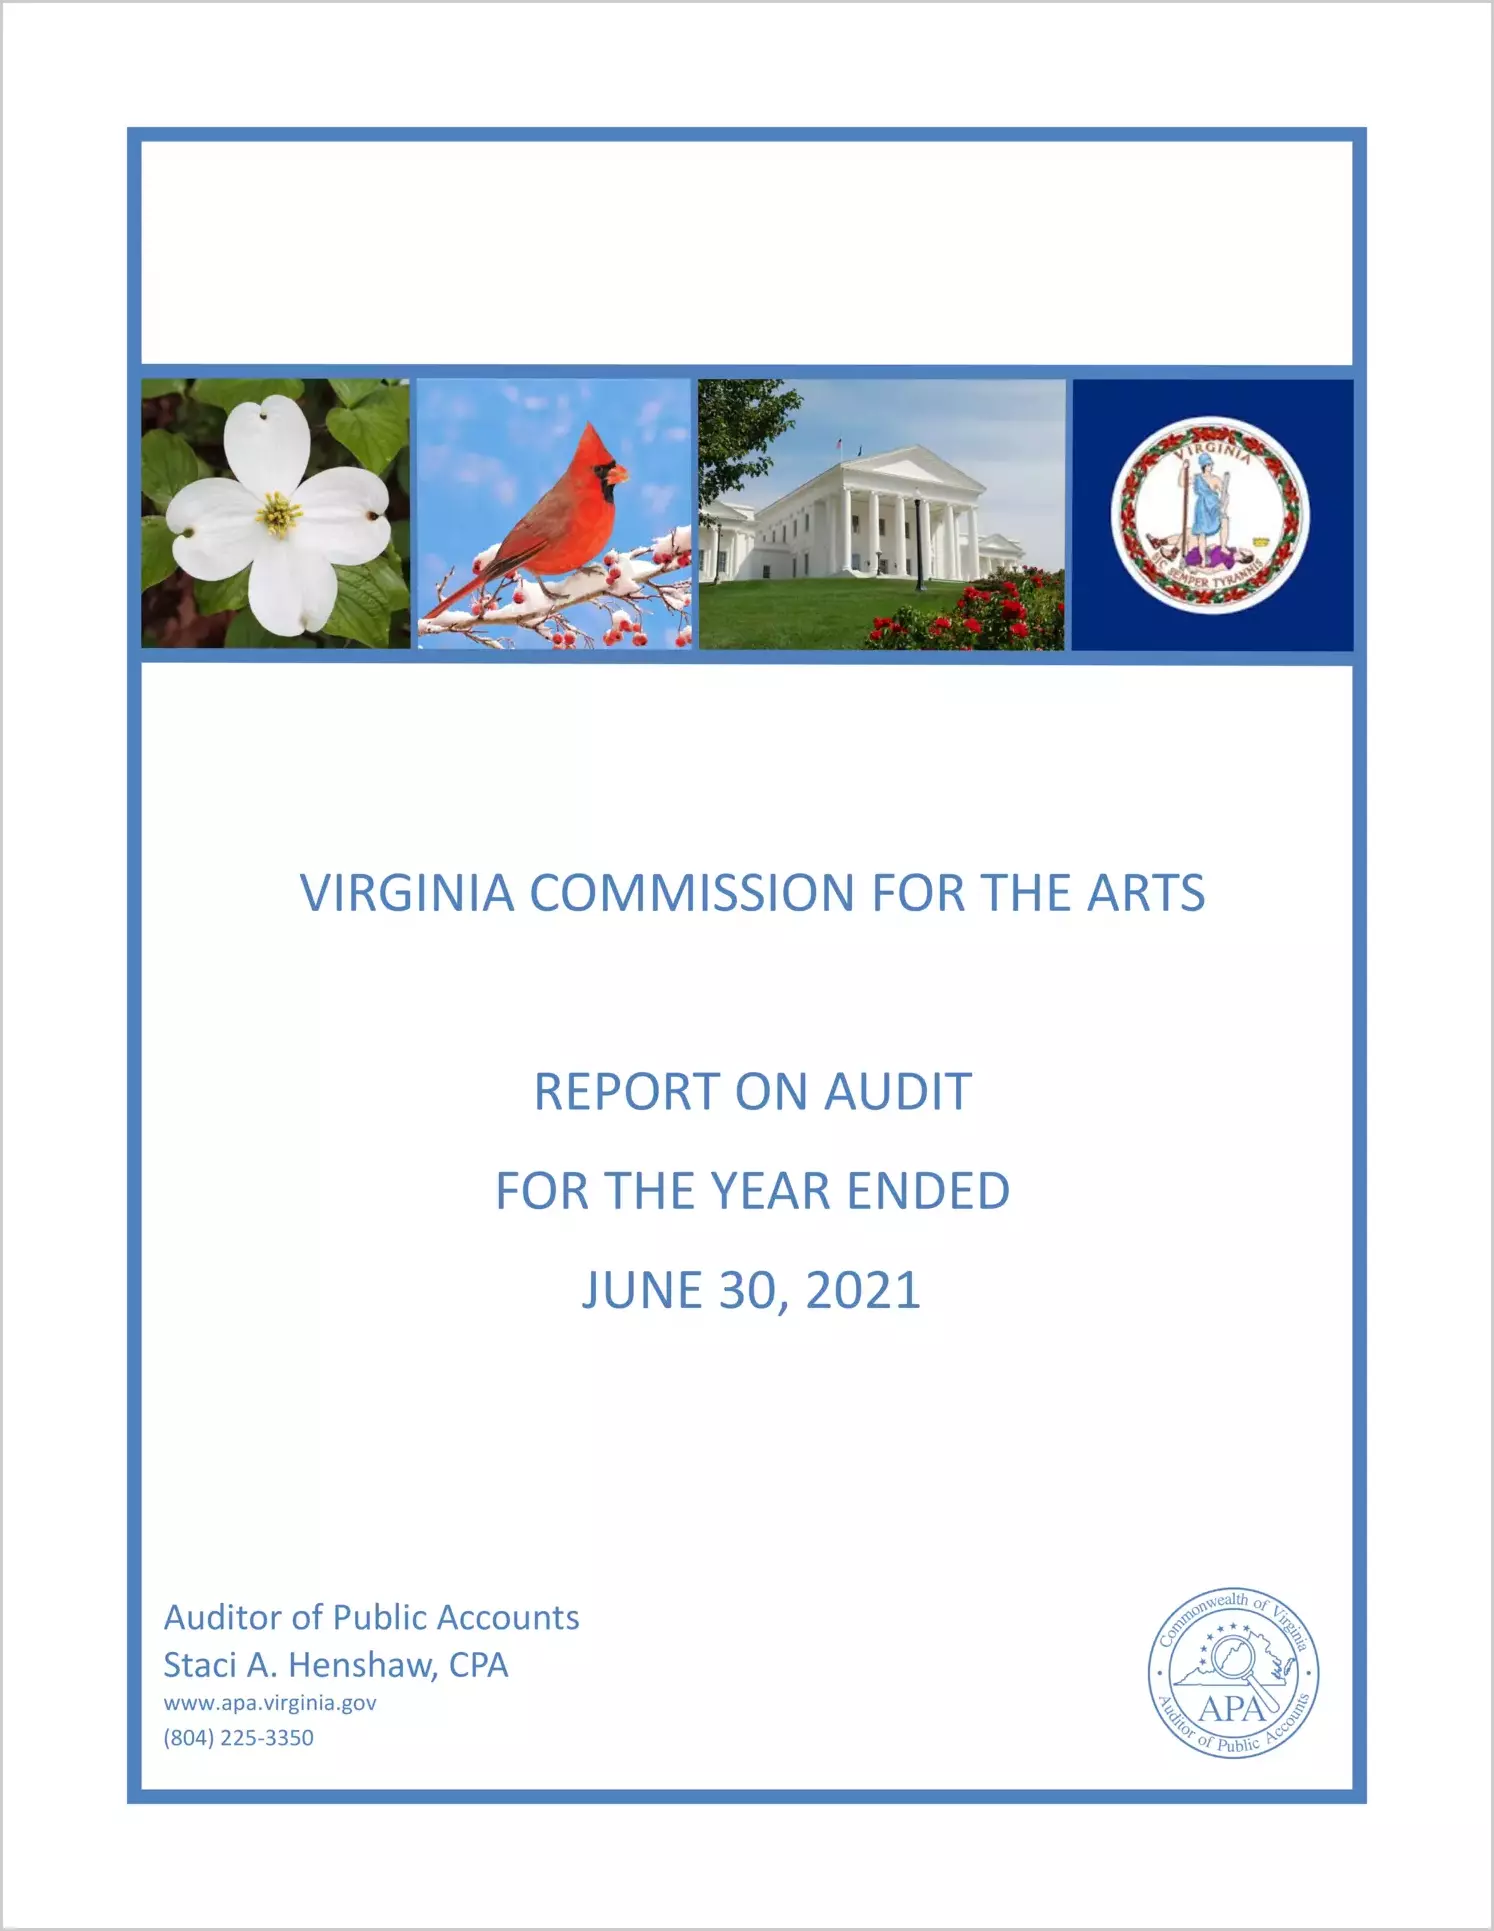 Virginia Commission for the Arts for the year ended June 30, 2021